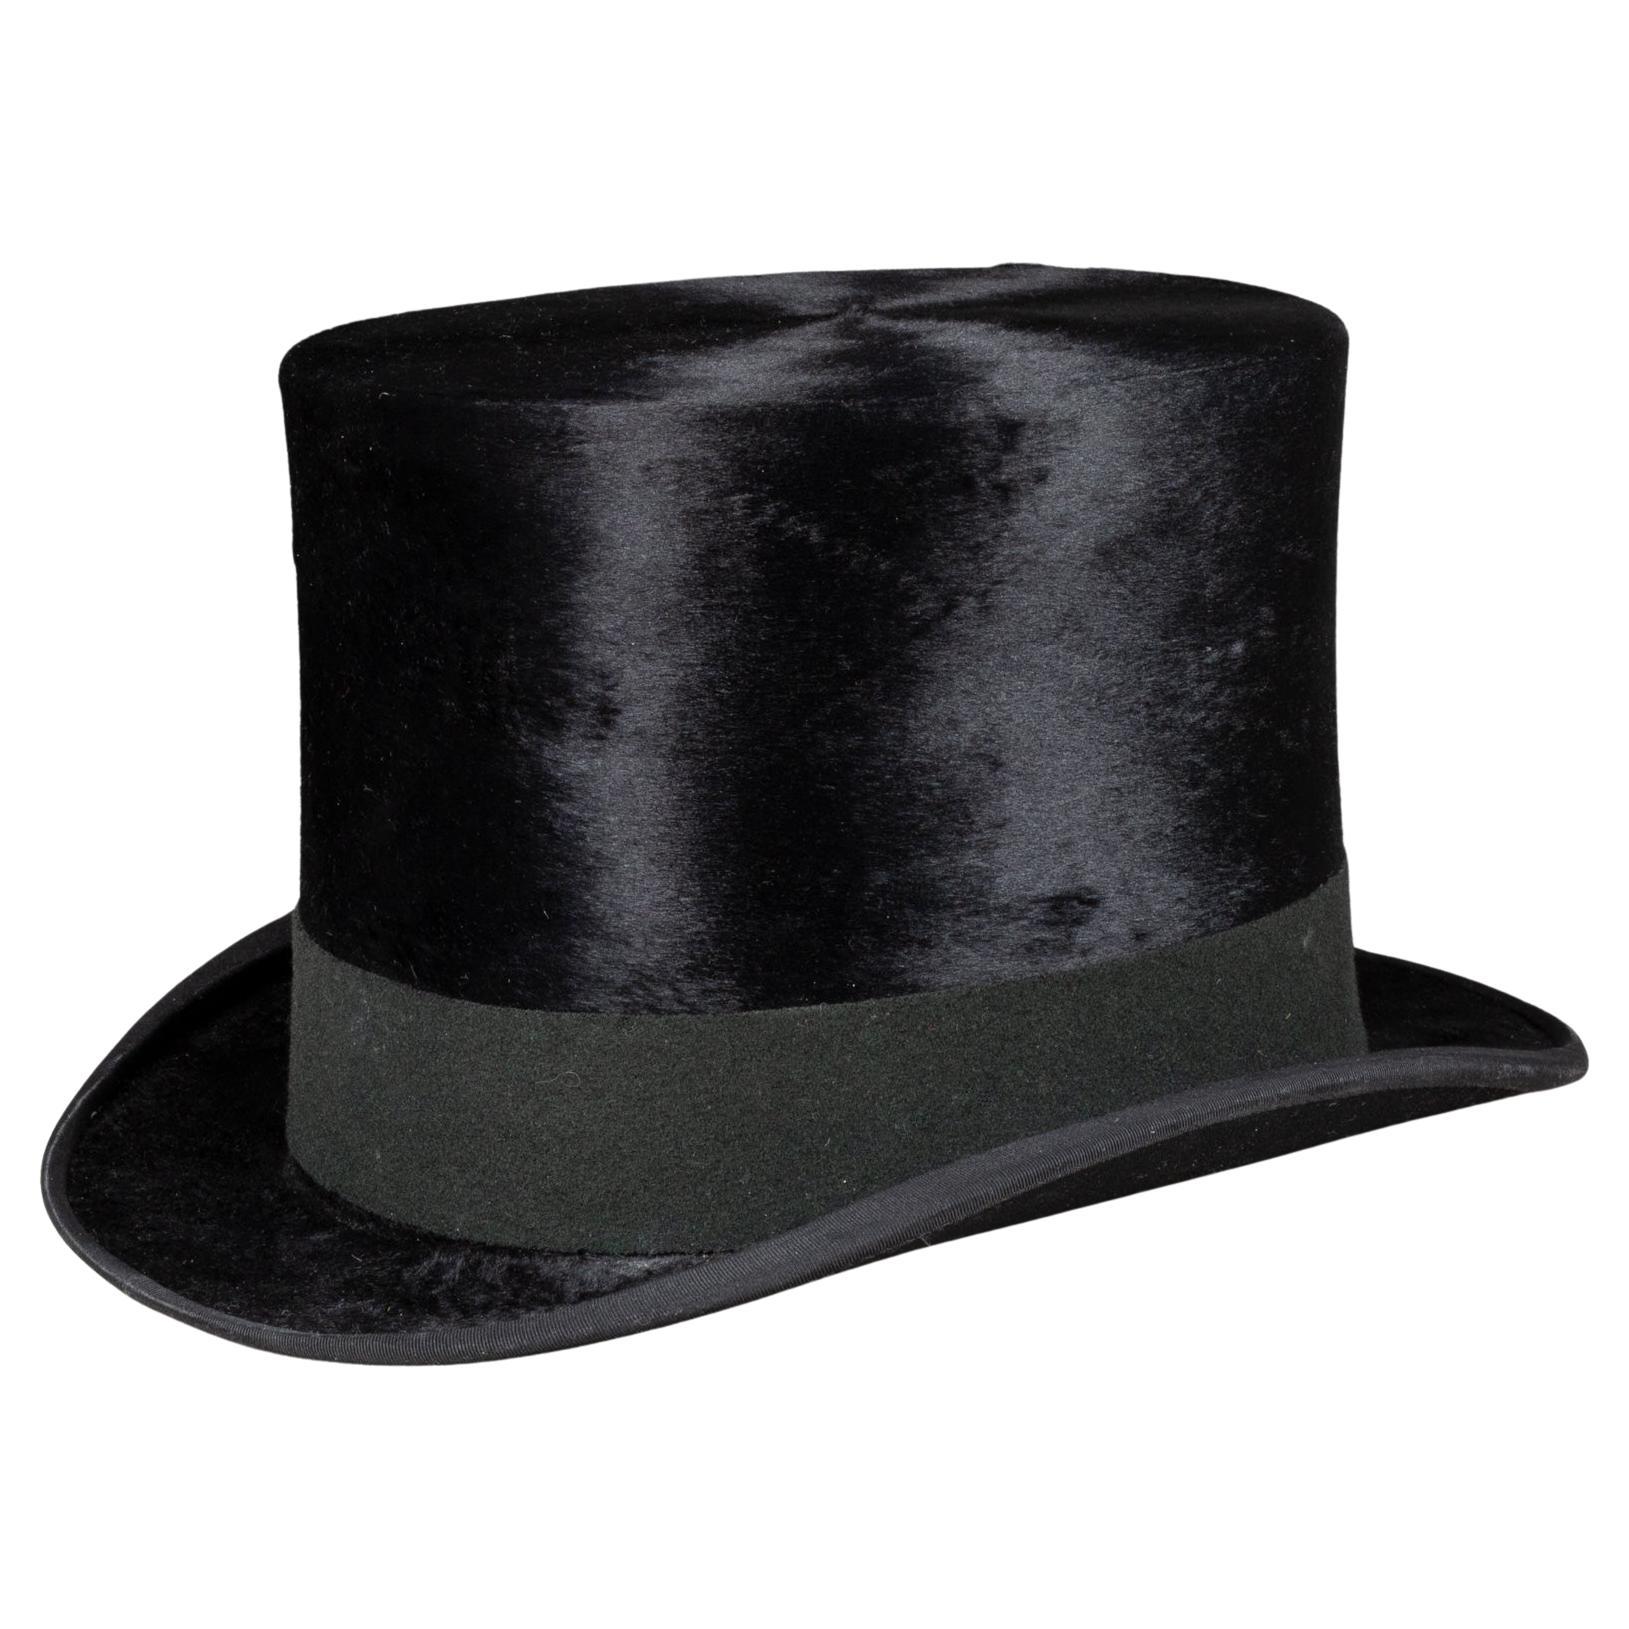 Antique Beaver Skin Top Hat c.1890-1920  (FREE SHIPPING) For Sale